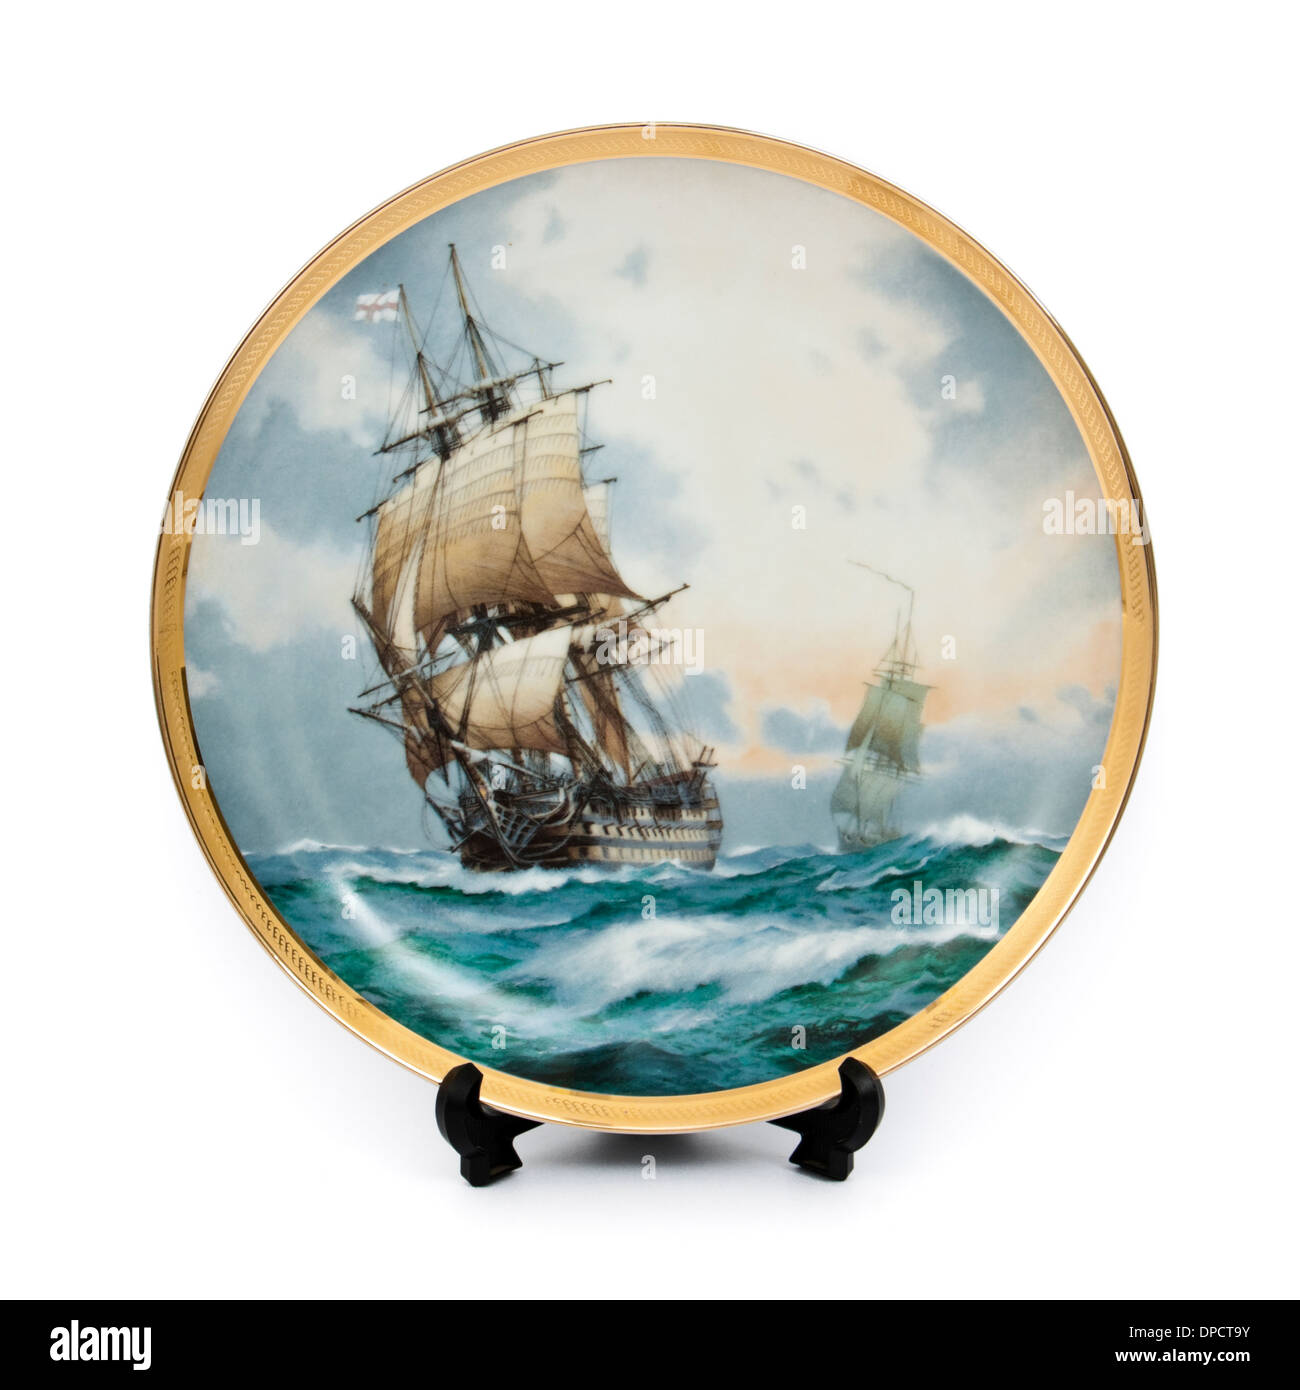 HMS Victory, Lord Nelson's famous flagship in the Battle of Trafalgar. Porcelain plate by Franklin Mint (1986). Stock Photo